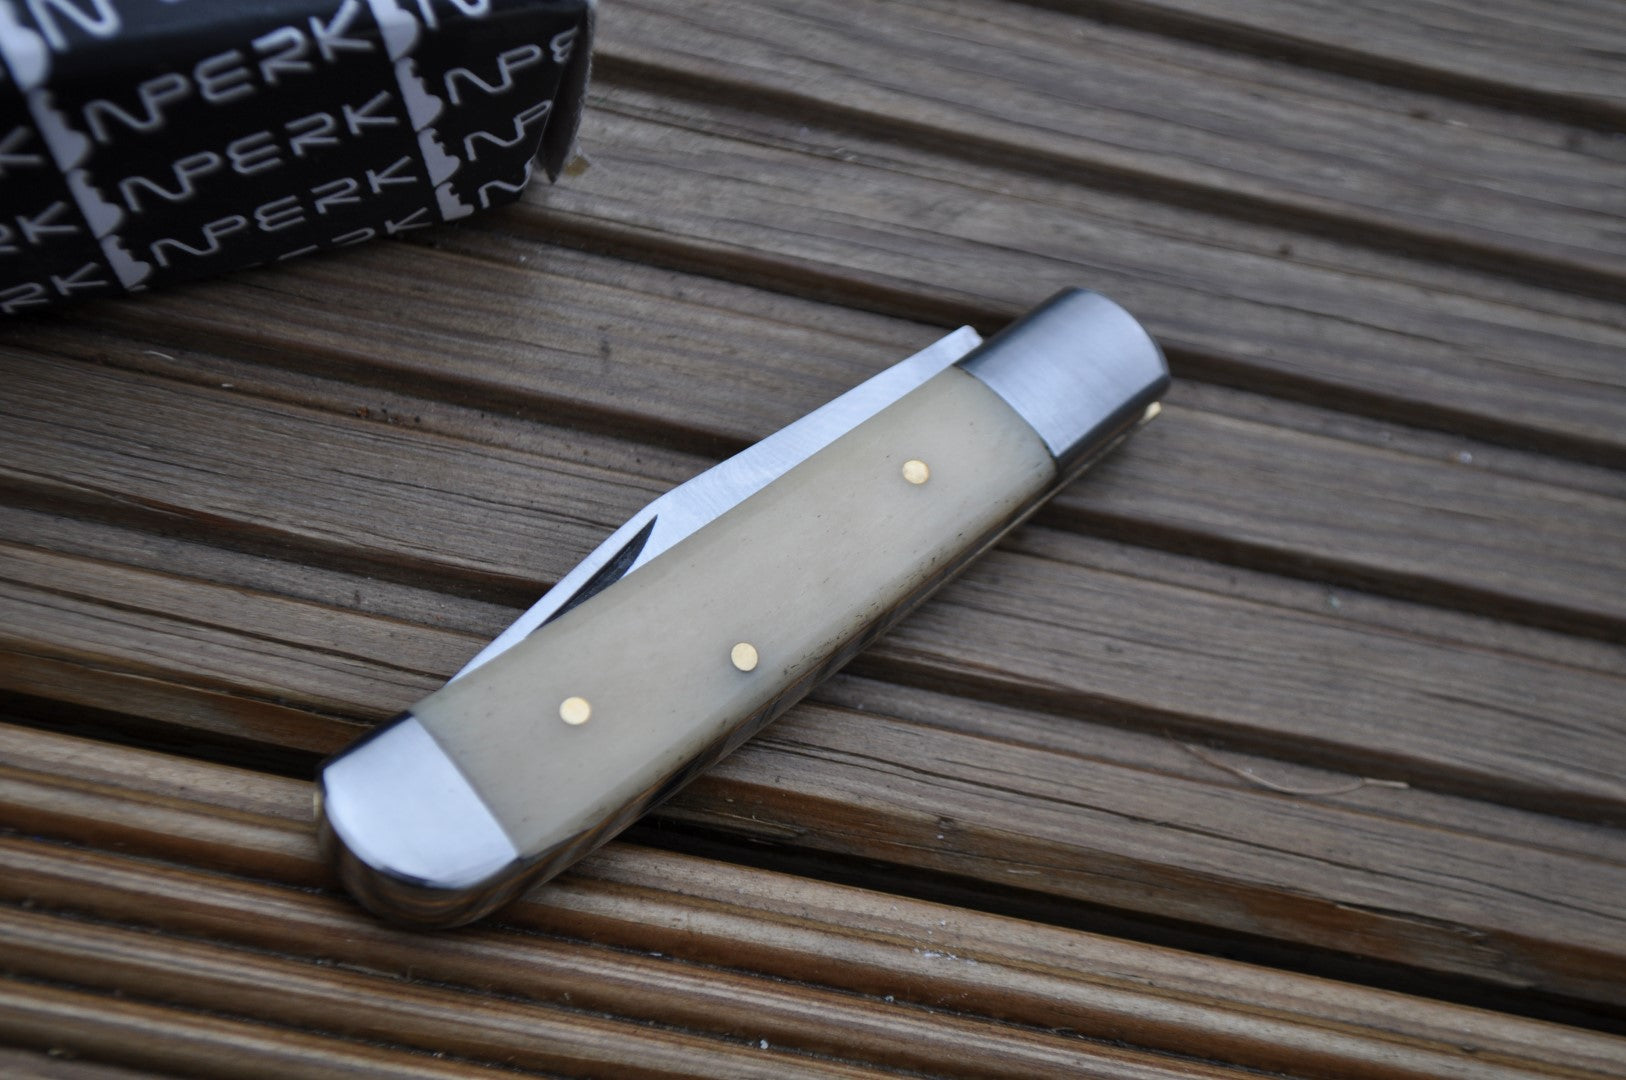 Legal to Carry Handmade Pocket Knife with Bone Handle